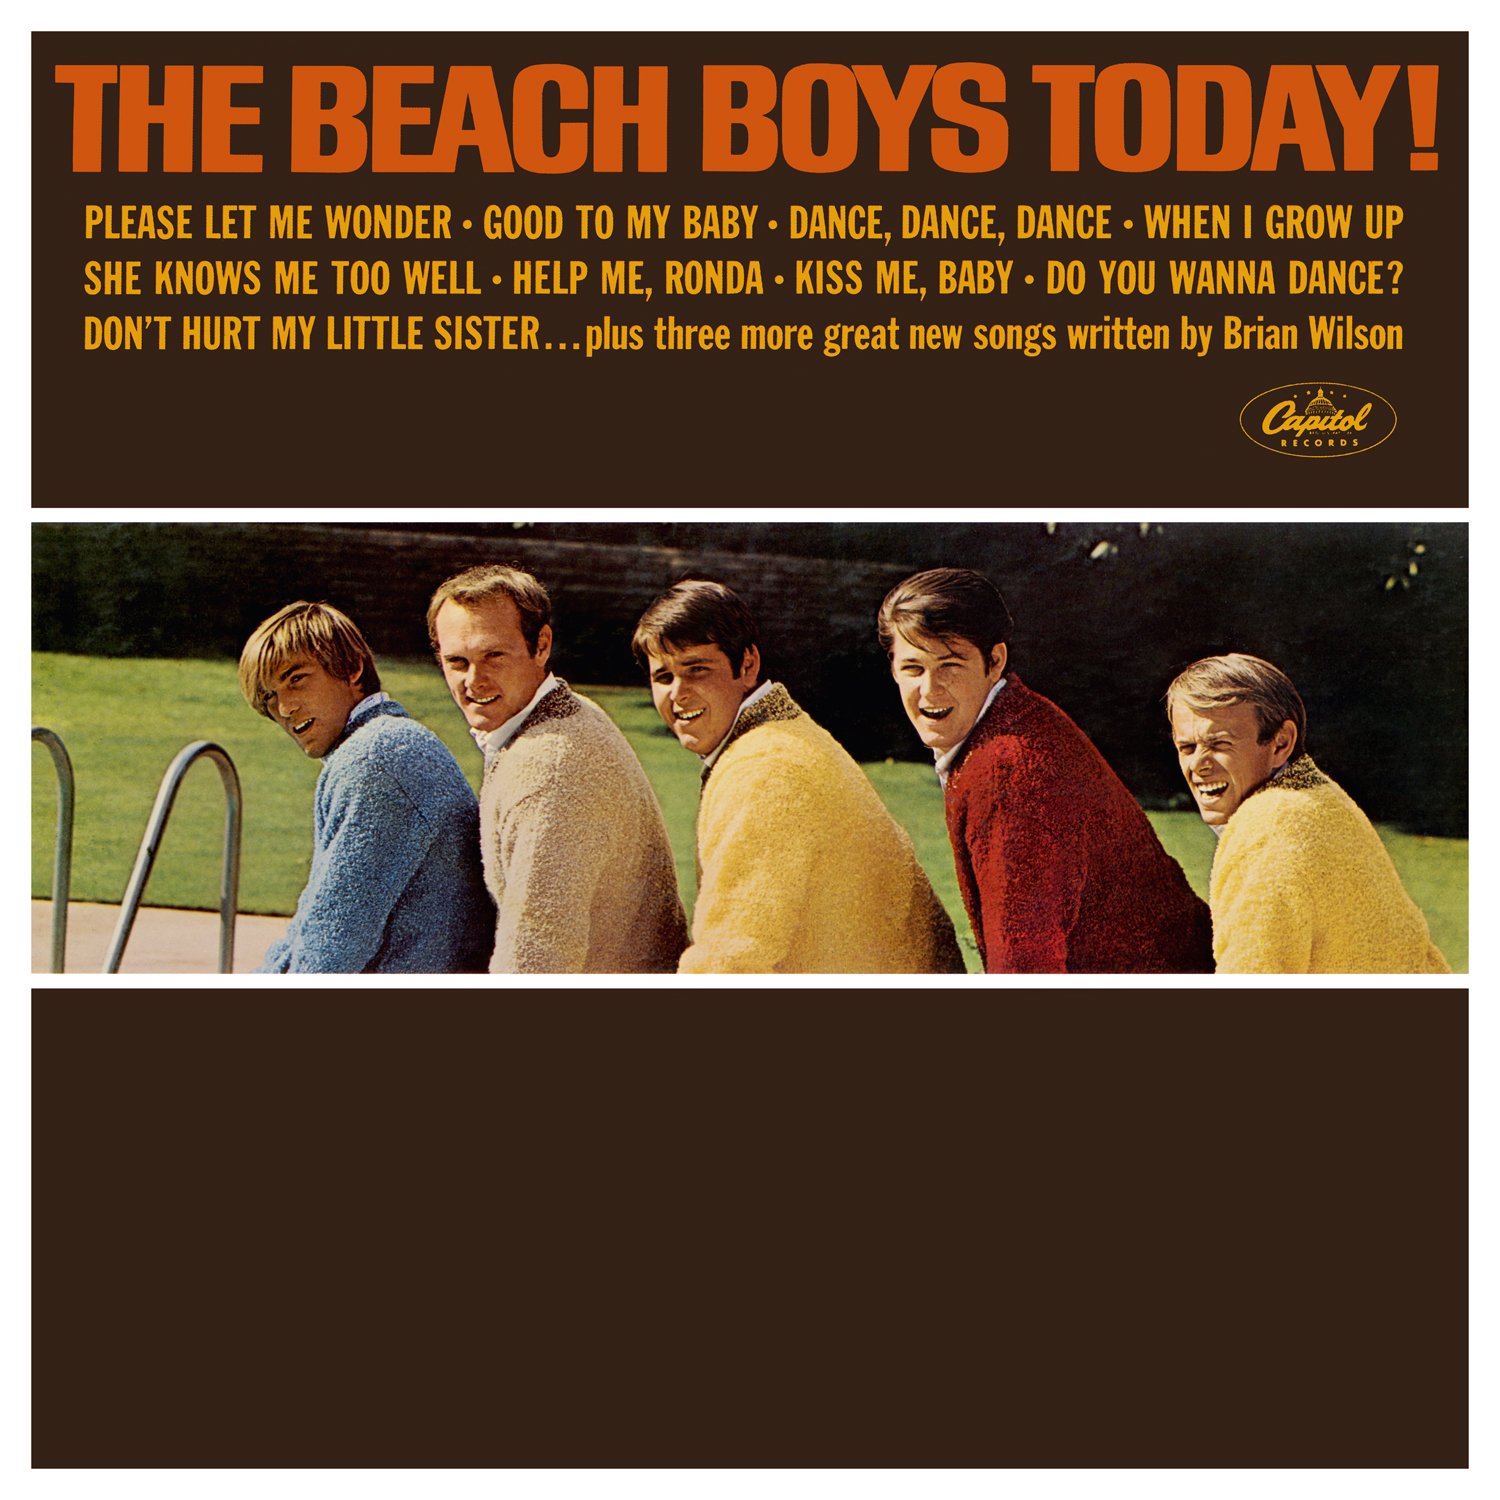 The Beach Boys-The Beach Boys Today-24-192-WEB-FLAC-REMASTERED DELUXE EDITION-2015-OBZEN Download